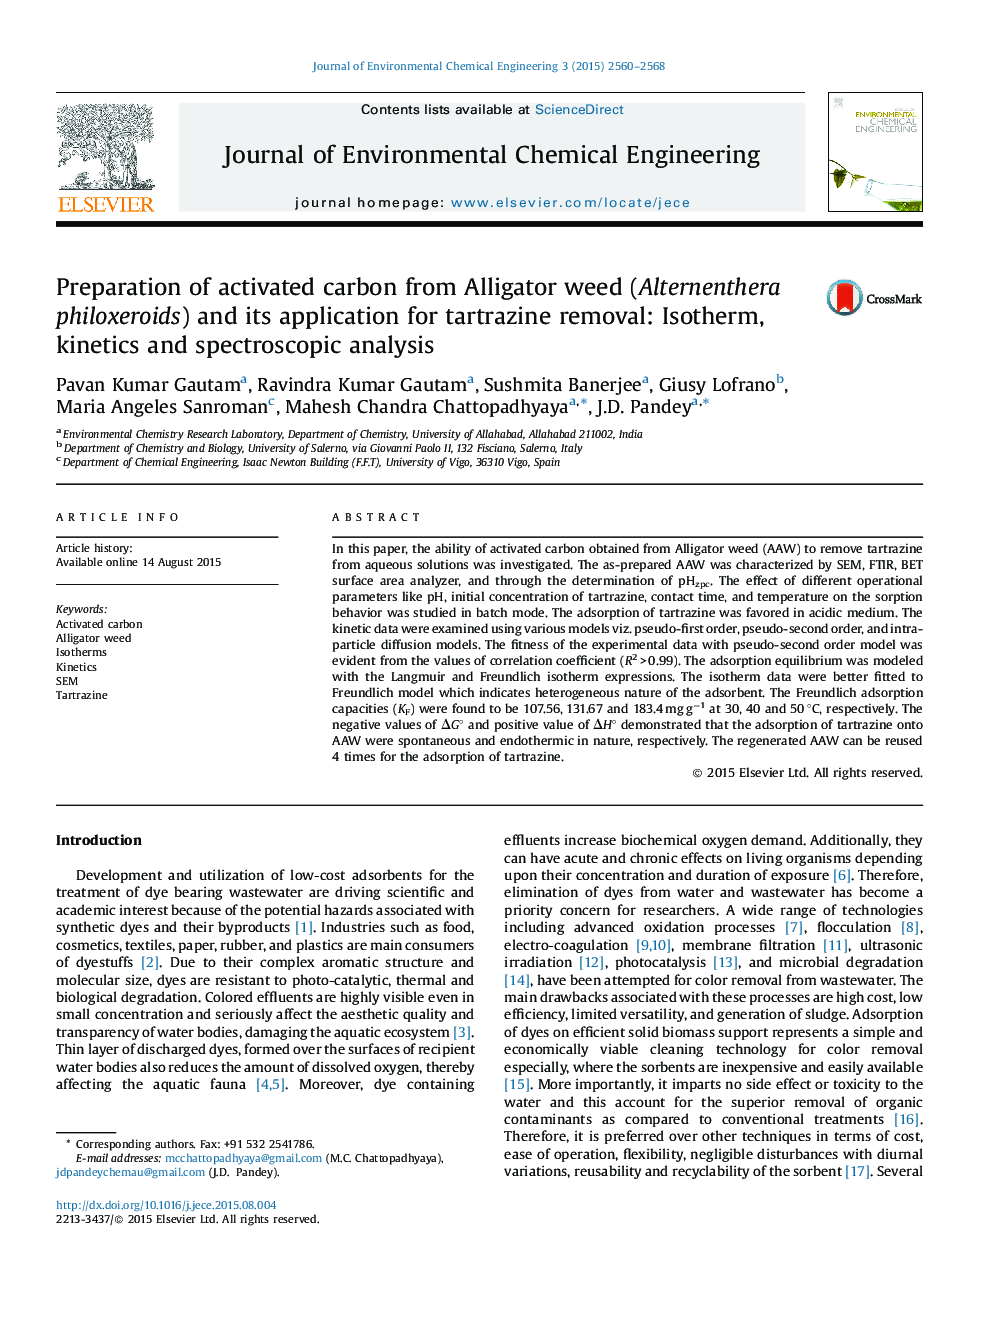 Preparation of activated carbon from Alligator weed (Alternenthera philoxeroids) and its application for tartrazine removal: Isotherm, kinetics and spectroscopic analysis